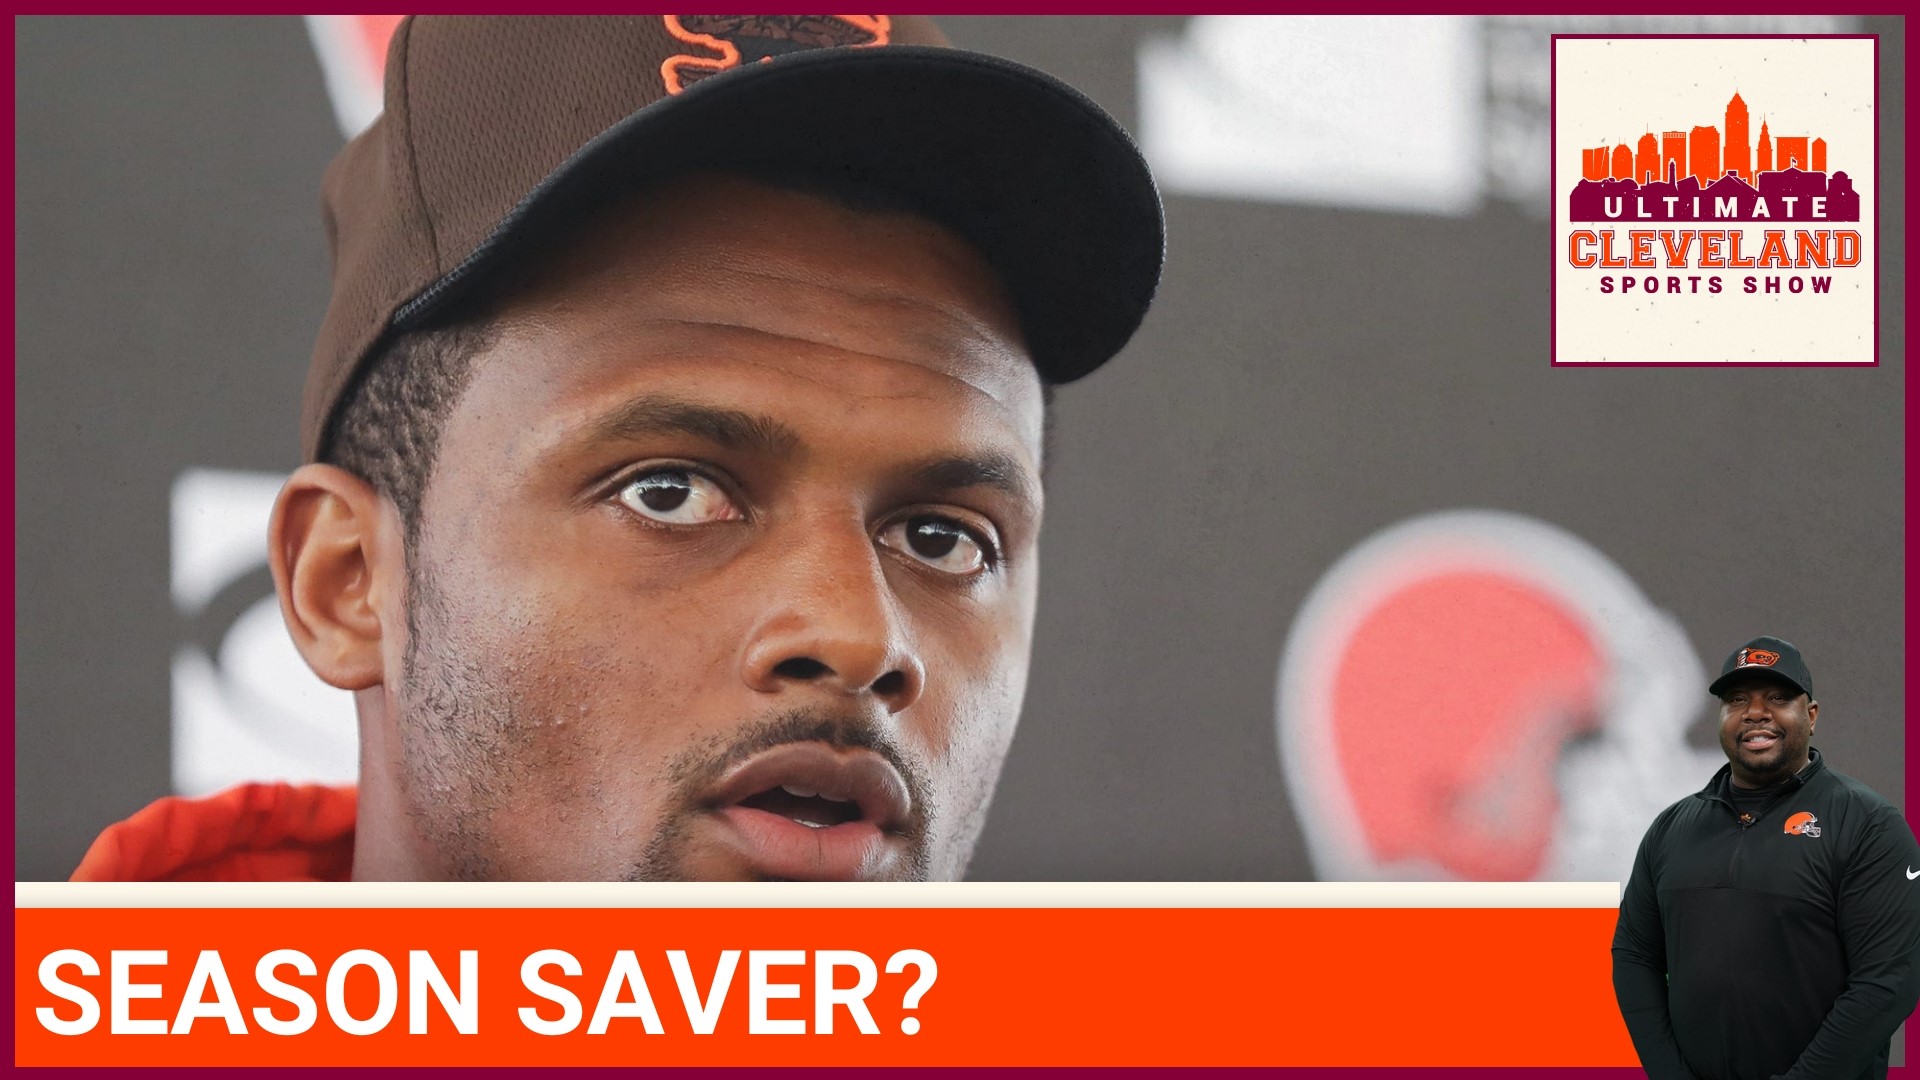 Deshaun Watson can't save the Cleveland Browns from the depths of the AFC but he can salvage some hope for the fanbase.